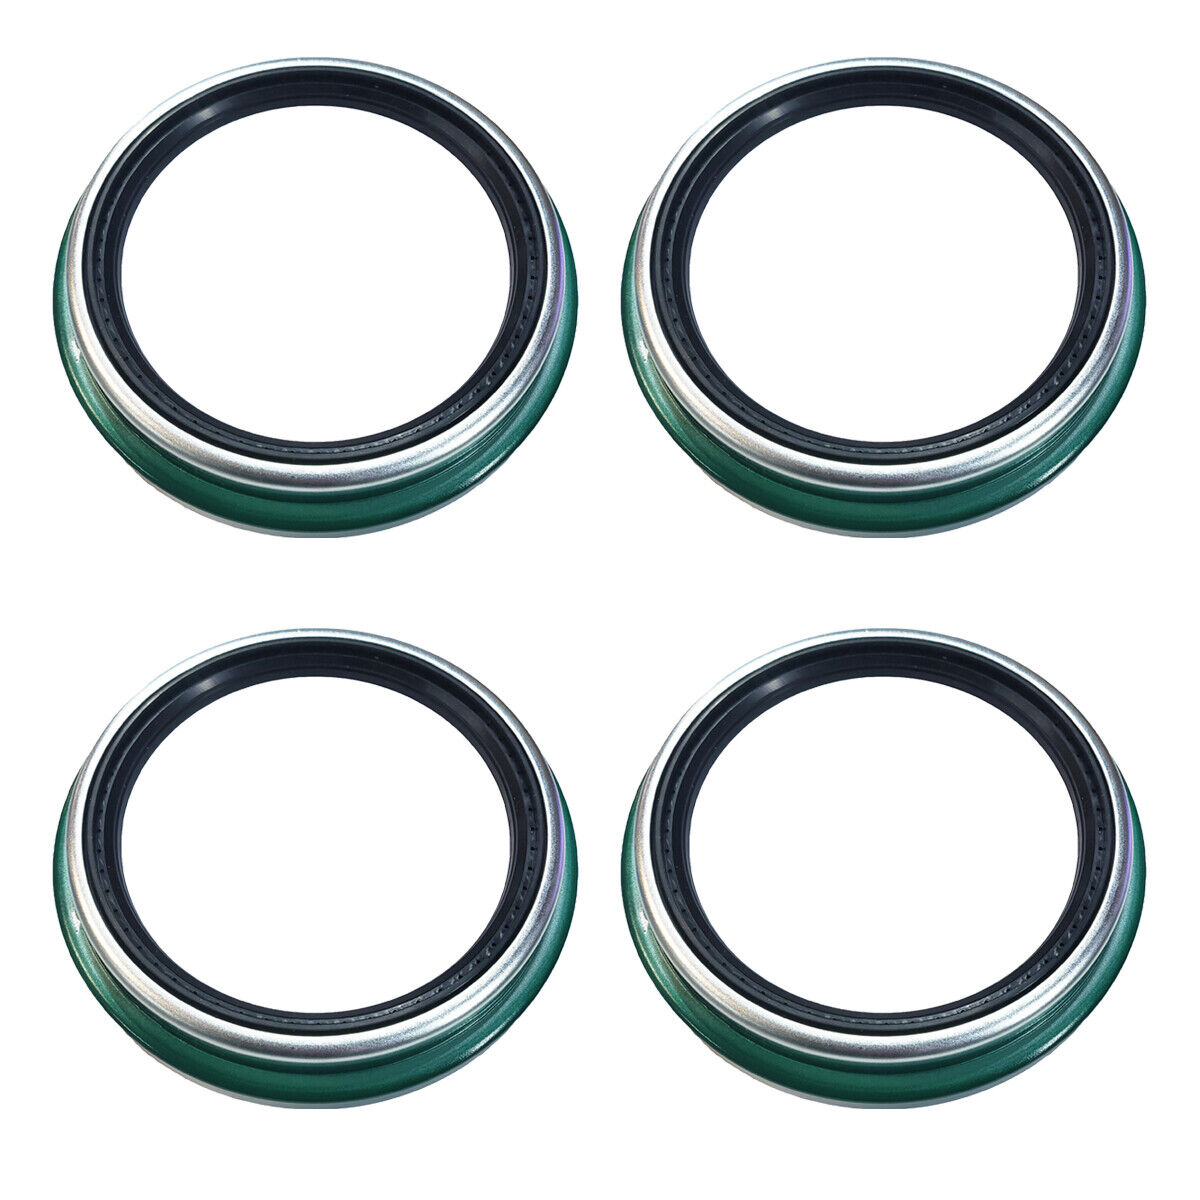 Classic Wheel Seal TR46305 Replaces Mer0243 SKF 46305 Stemco 373-0143 -Pack of 4